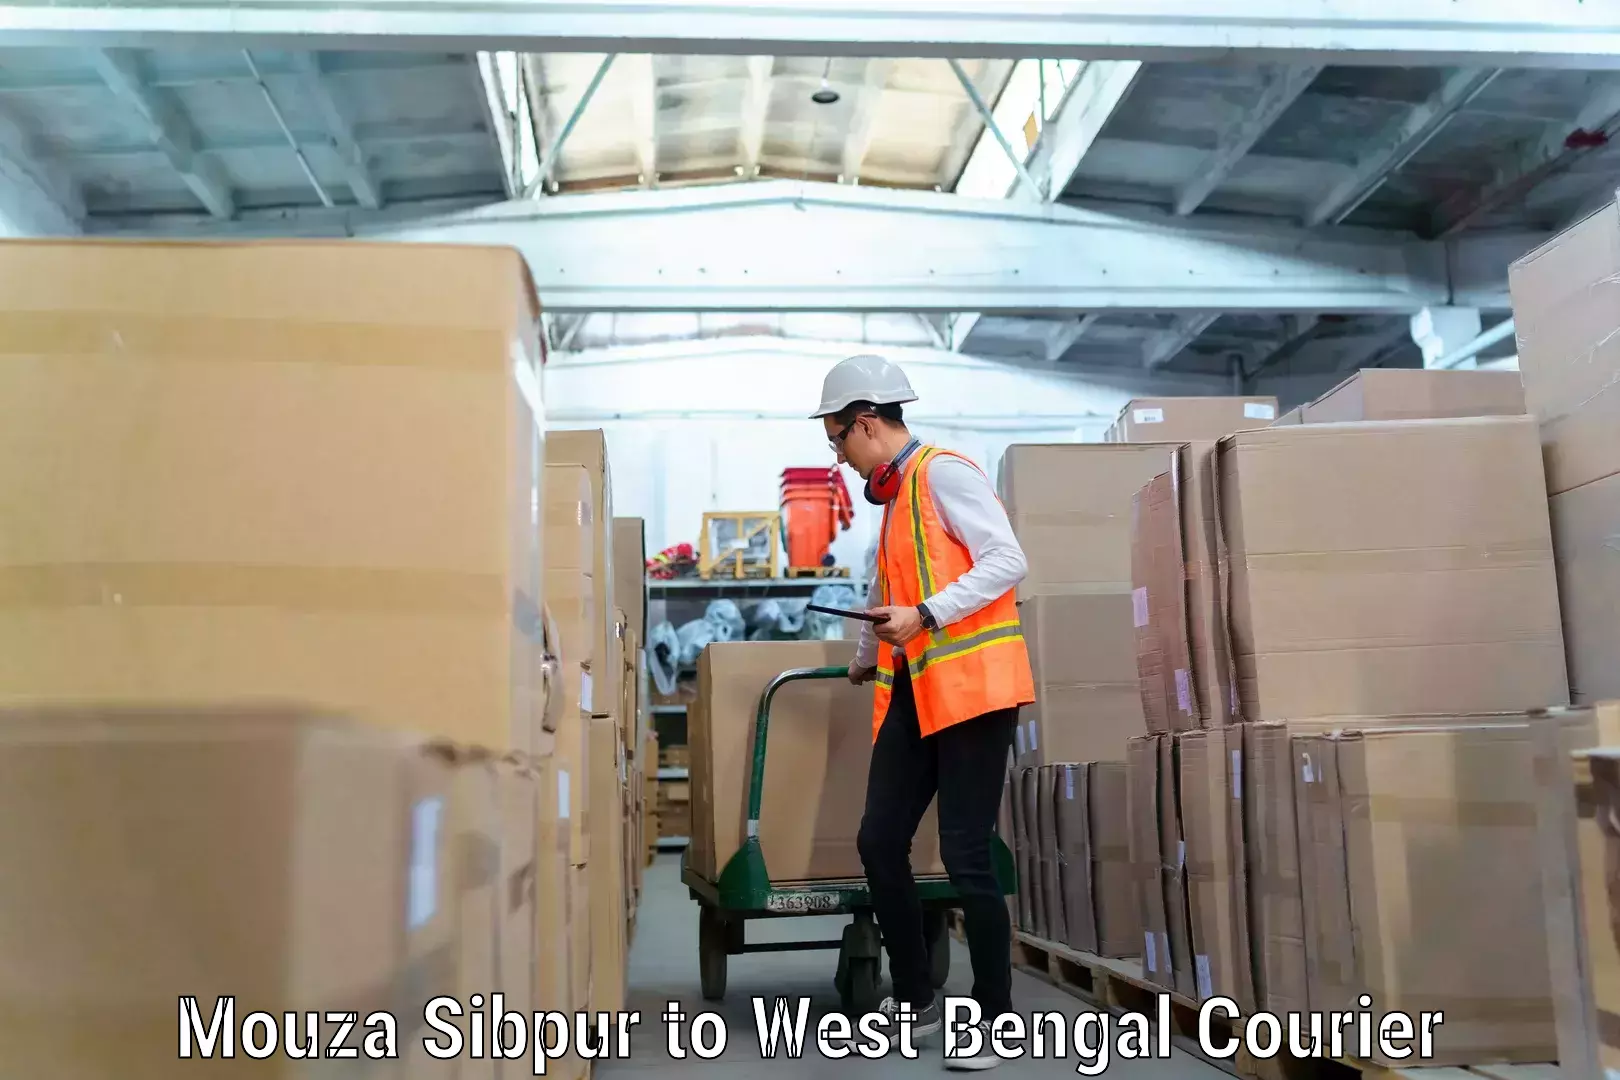 Specialized moving company Mouza Sibpur to West Bengal